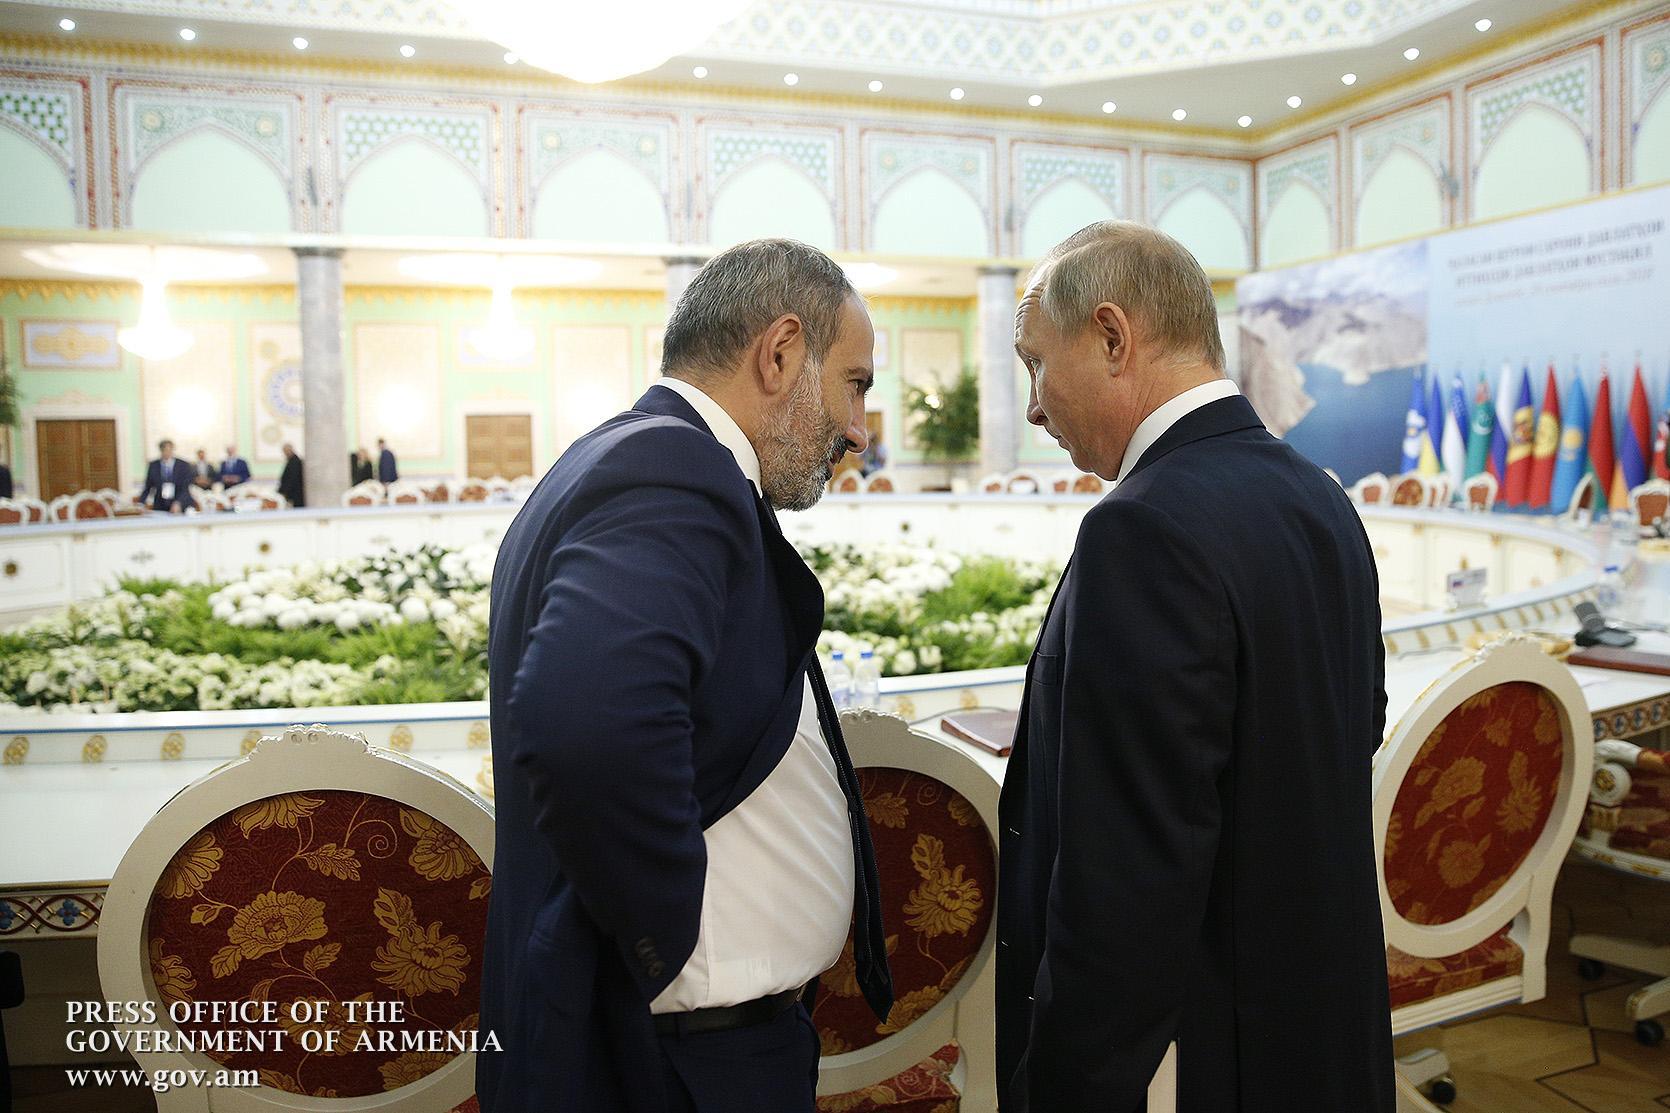 Putin Congratulates Pashinyan on His Appointment as Prime Minister